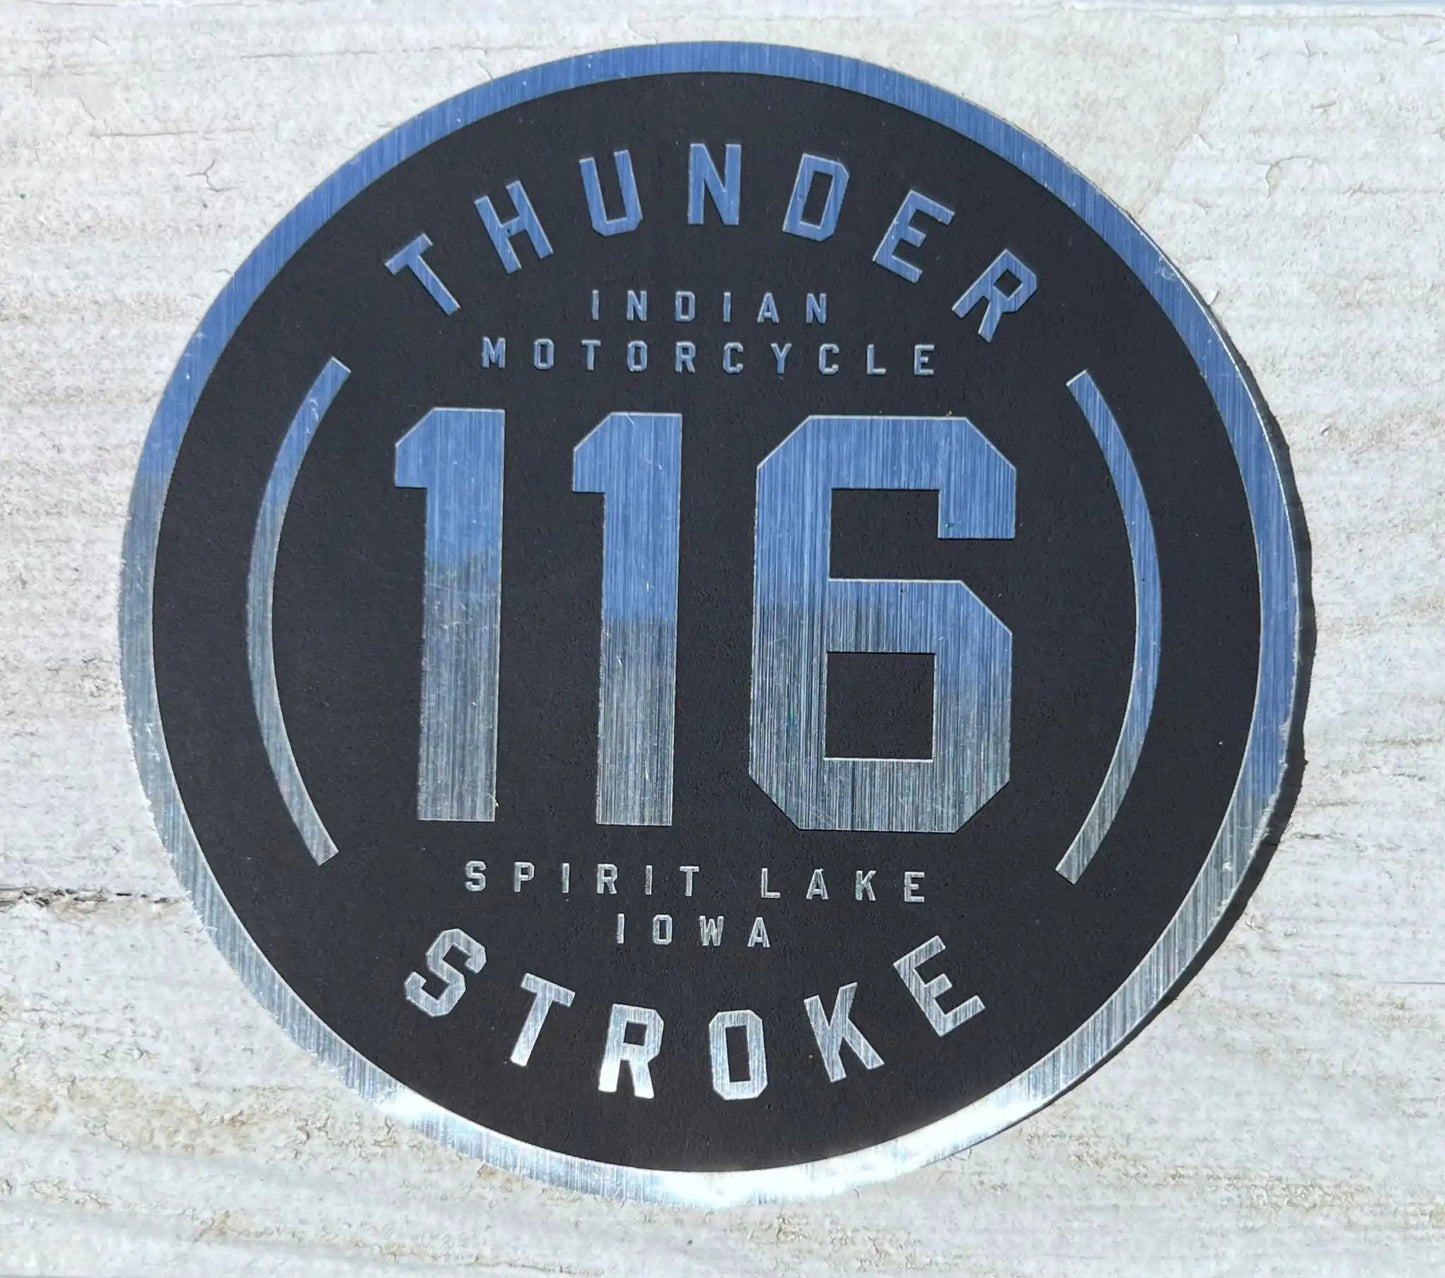 Indian Motorcycle Co Thunderstroke 116 Decal New Old Stock Excellent Item Relic has been stored safely away and measures approximately 1 x 3 inch shield